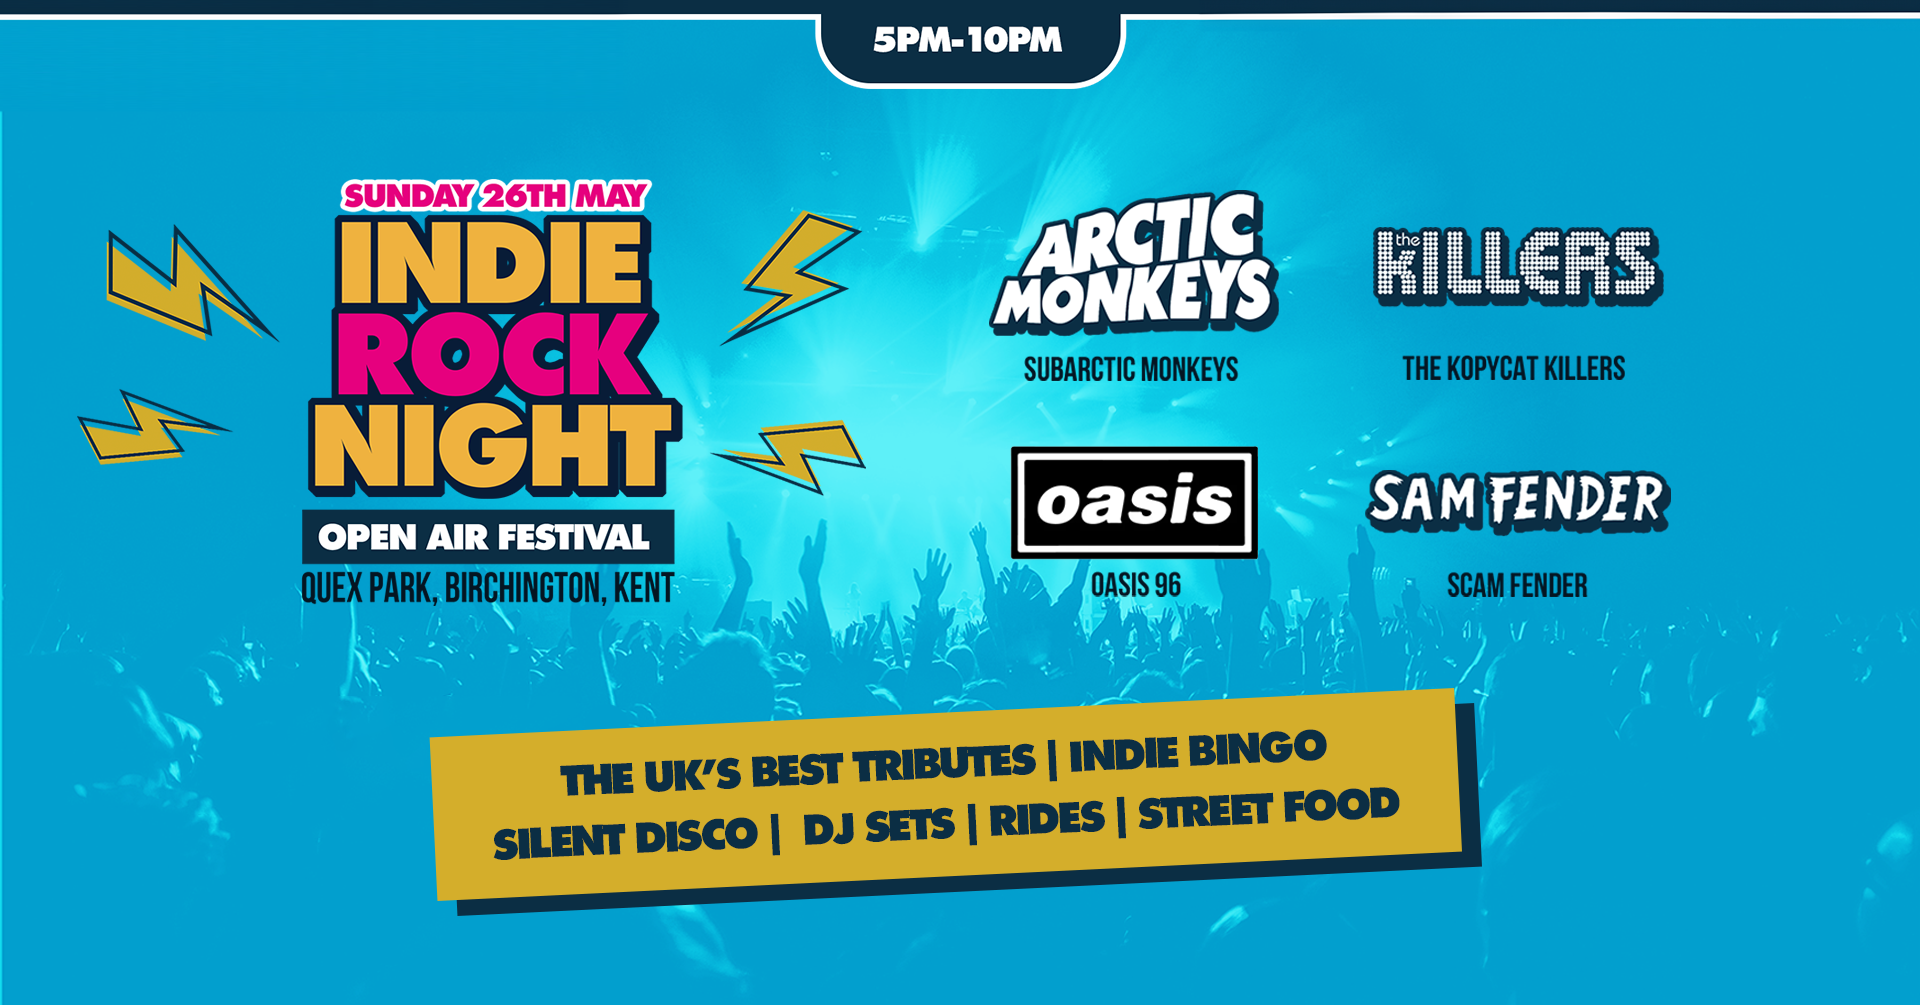 INDIE ROCK NIGHT ∙ Open Air Festival *ONLY 33 £15 TICKETS LEFT*